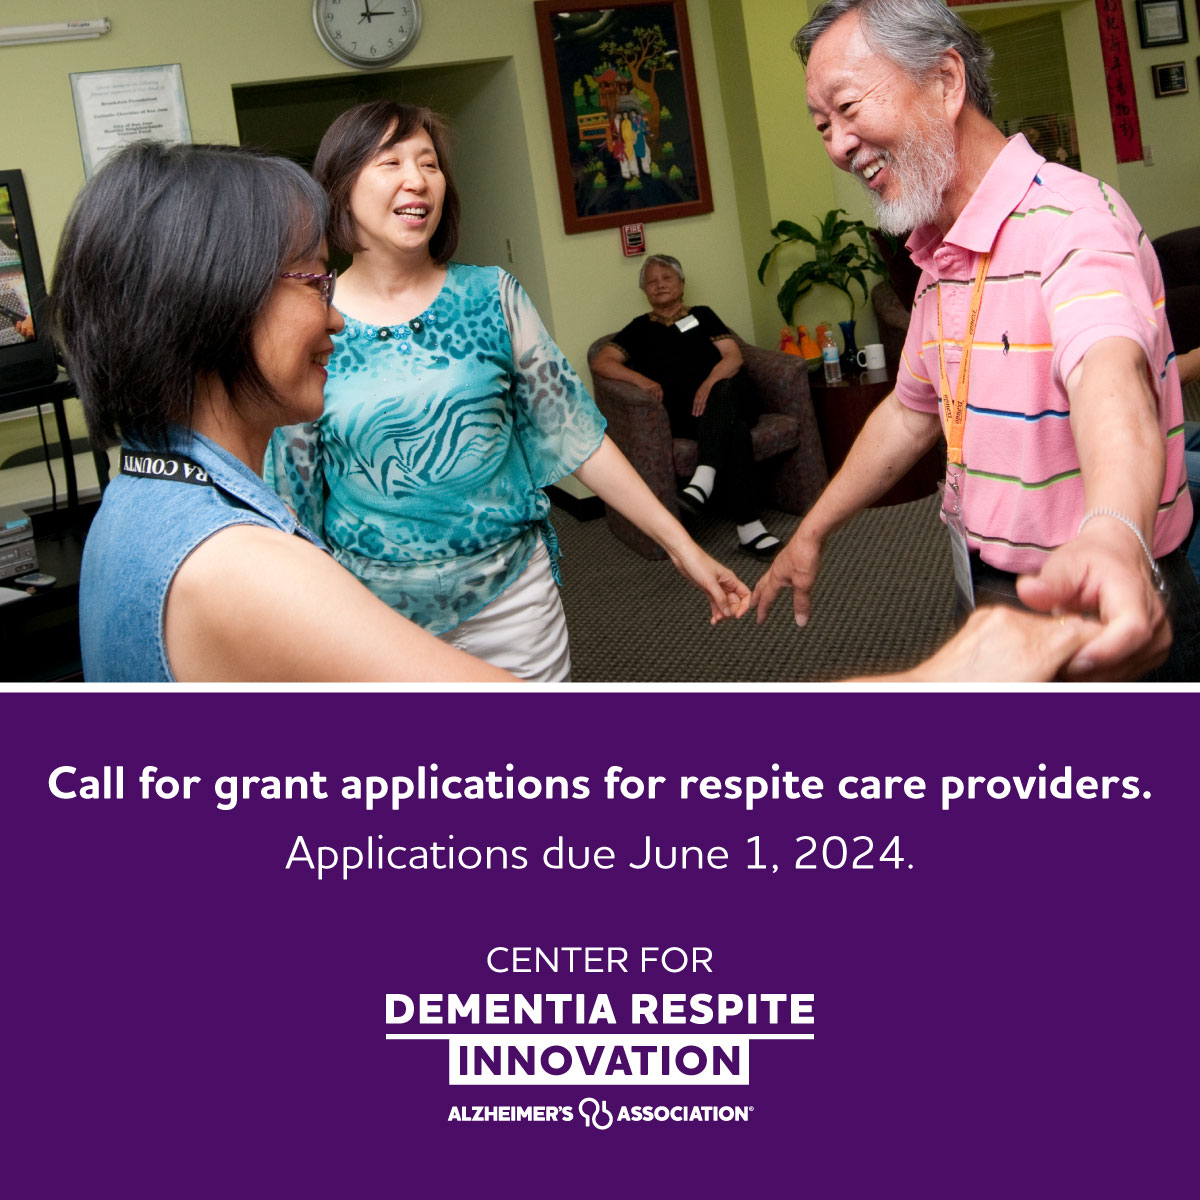 Beginning in July 2024, the Alzheimer’s Association Center for Dementia Respite Innovation will provide up to 20 grants totaling $4M annually for the next five years to respite providers to enhance respite care for dementia caregivers. Apply at alz.org/CDRI.